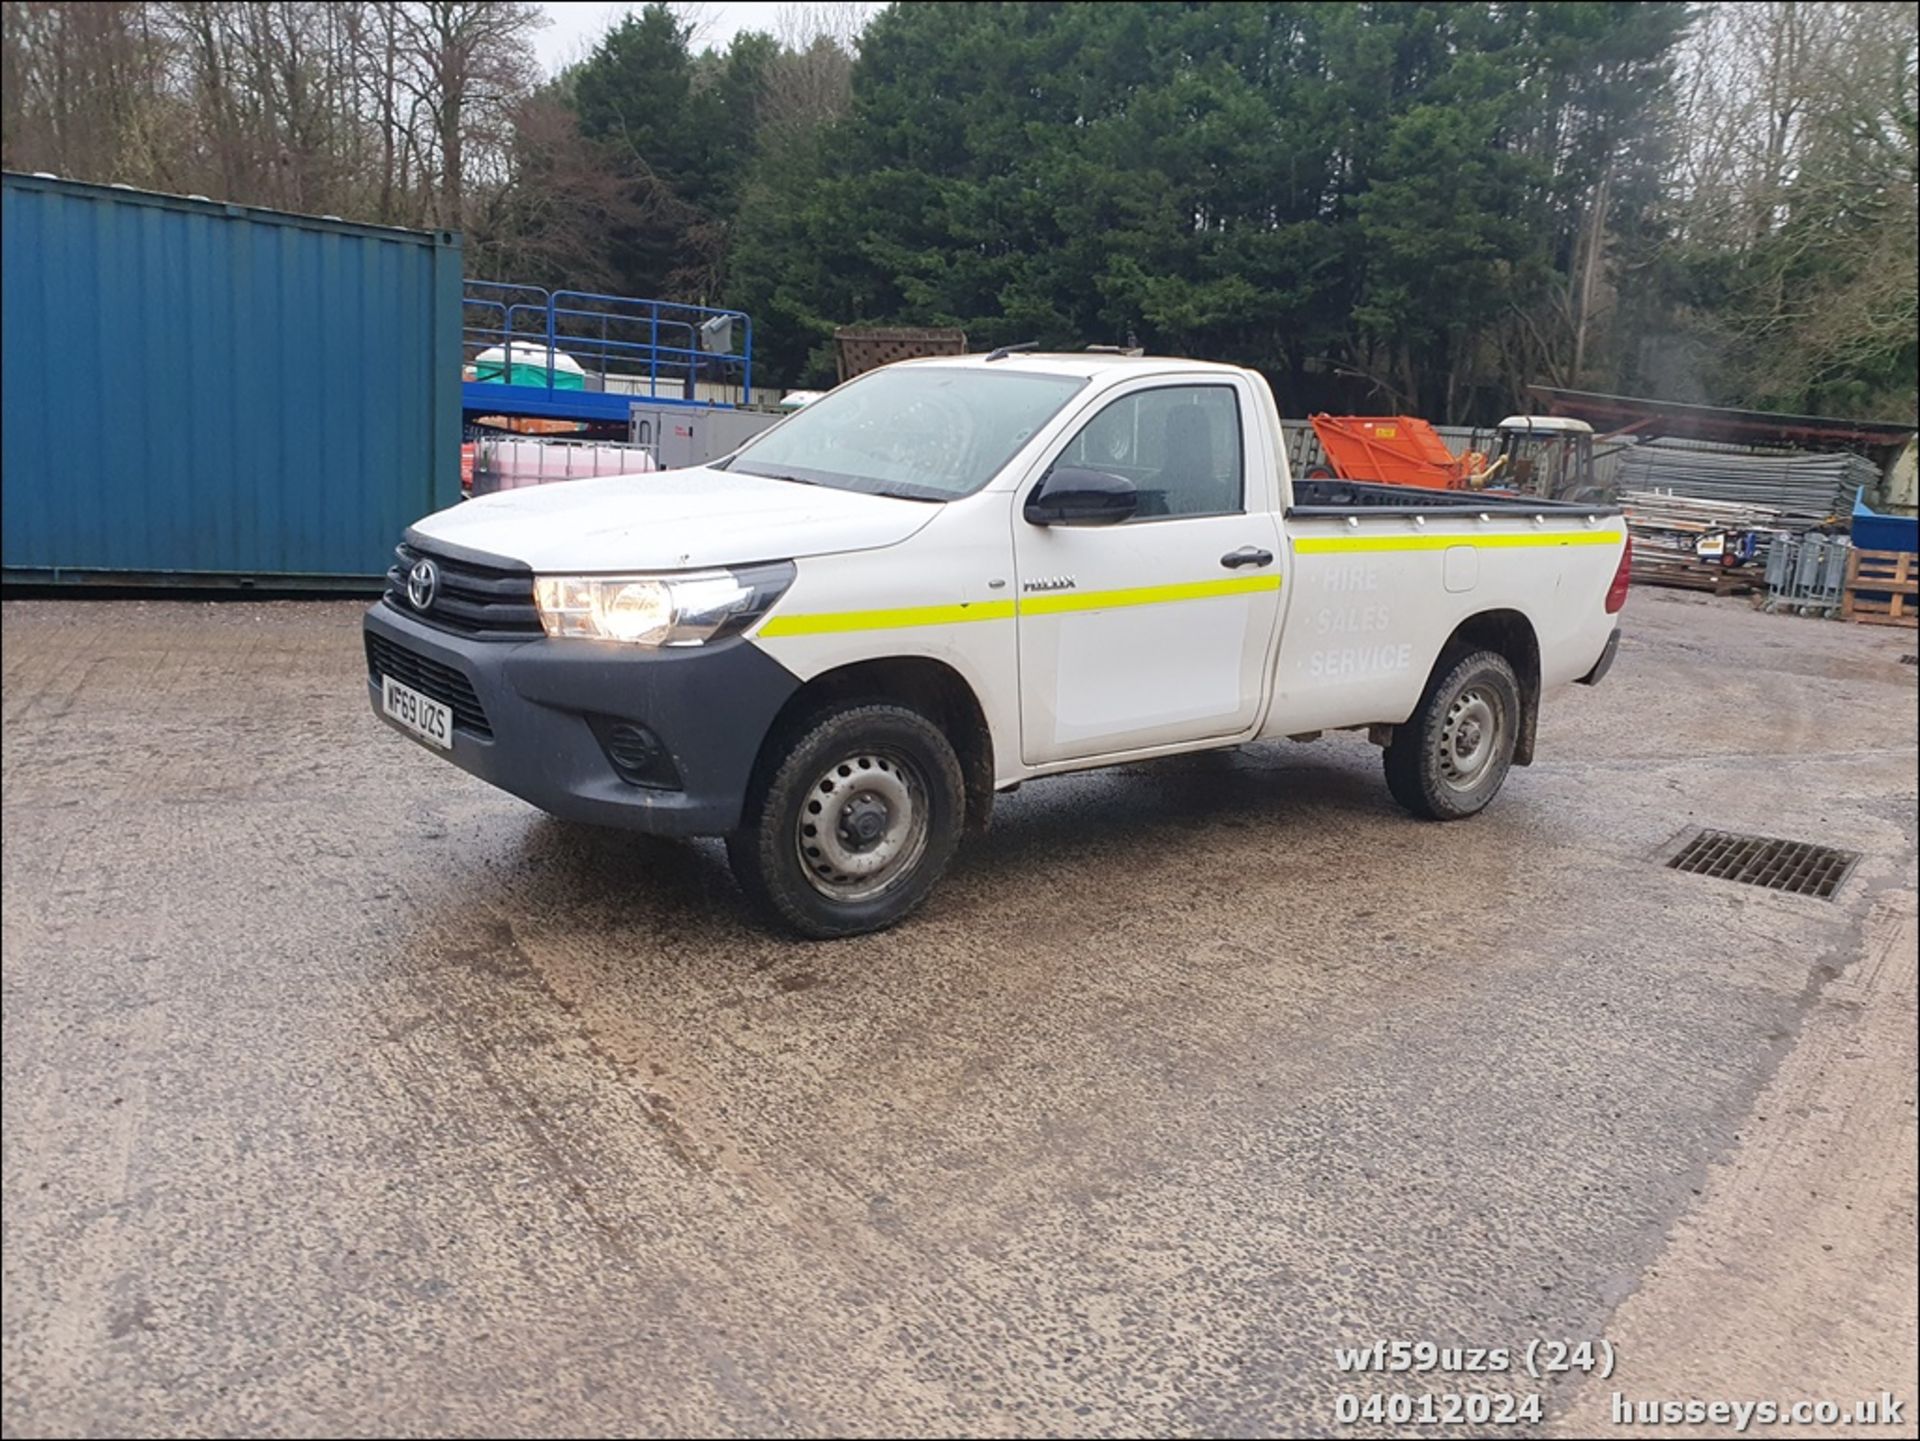 19/69 TOYOTA HILUX ACTIVE D-4D 4WD S/C - 2393cc 2dr 4x4 (White, 150k) - Image 26 of 50